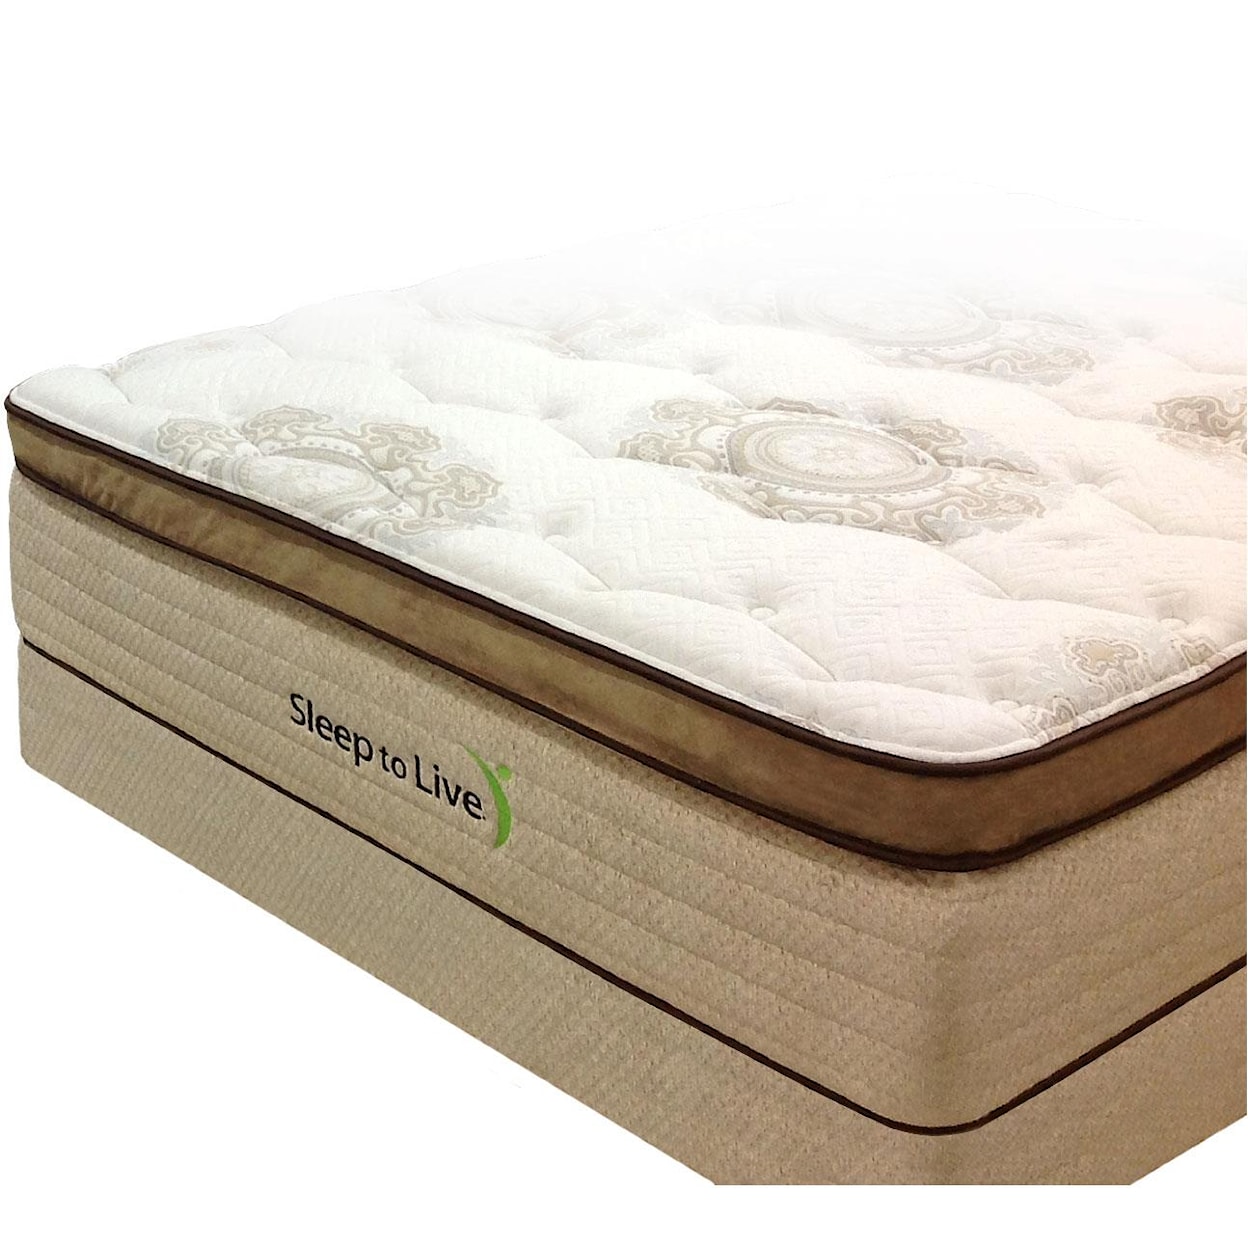 Kingsdown Body System 3 Twin XL Pocketed Coil Mattress